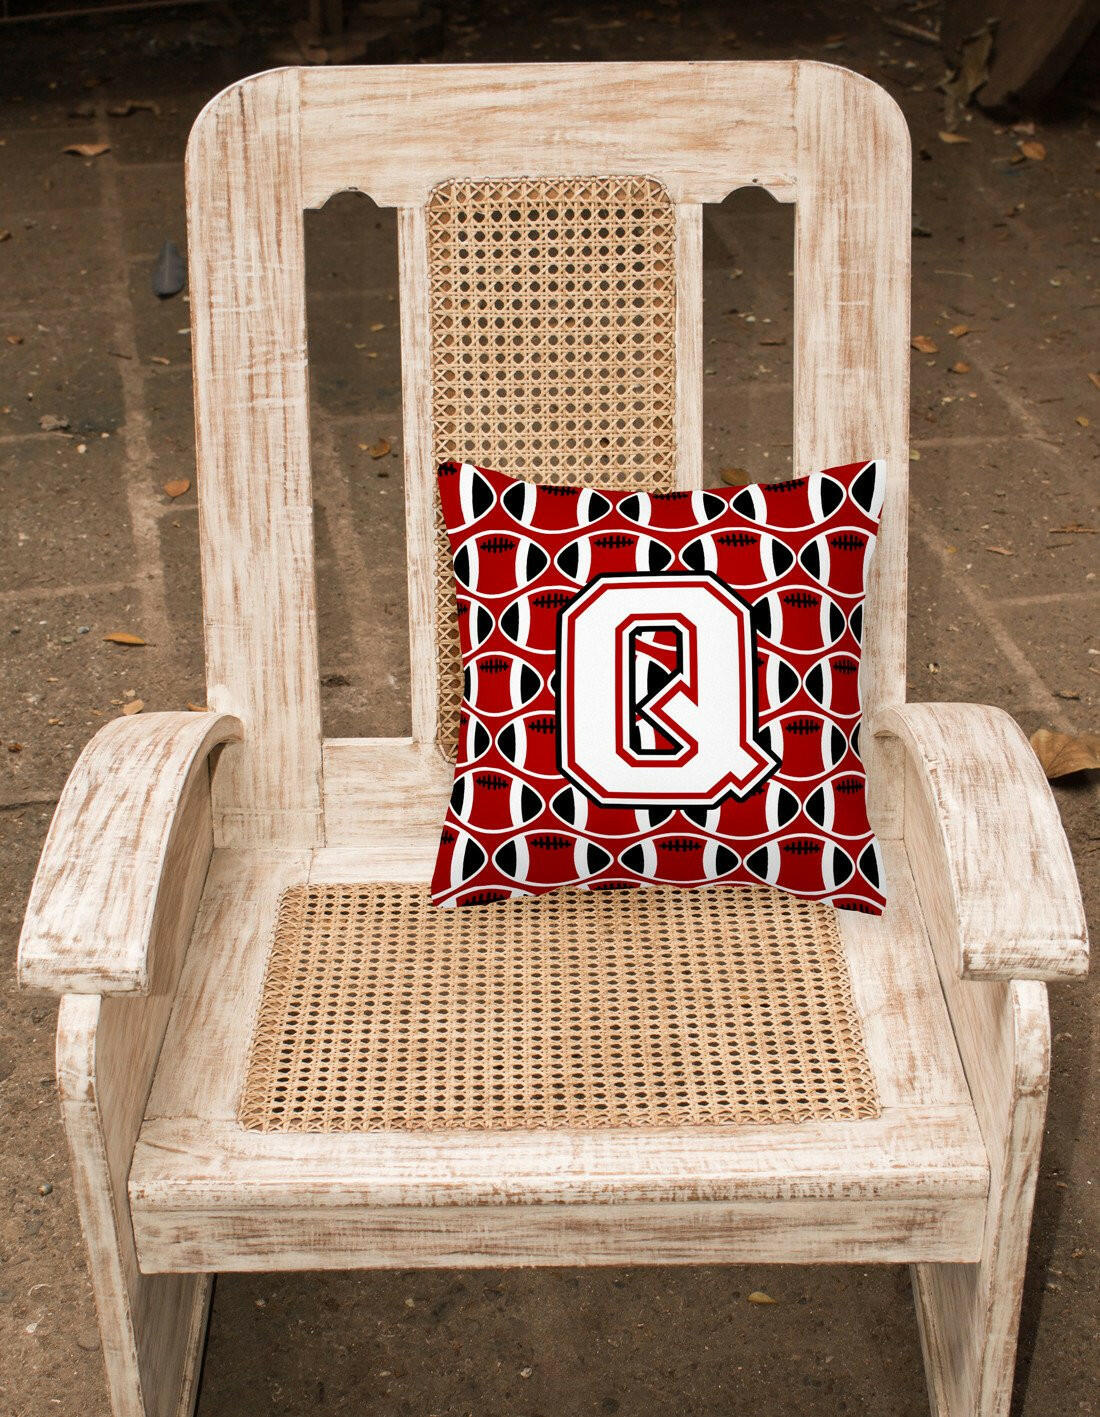 Letter Q Football Cardinal and White Fabric Decorative Pillow CJ1082-QPW1414 by Caroline's Treasures